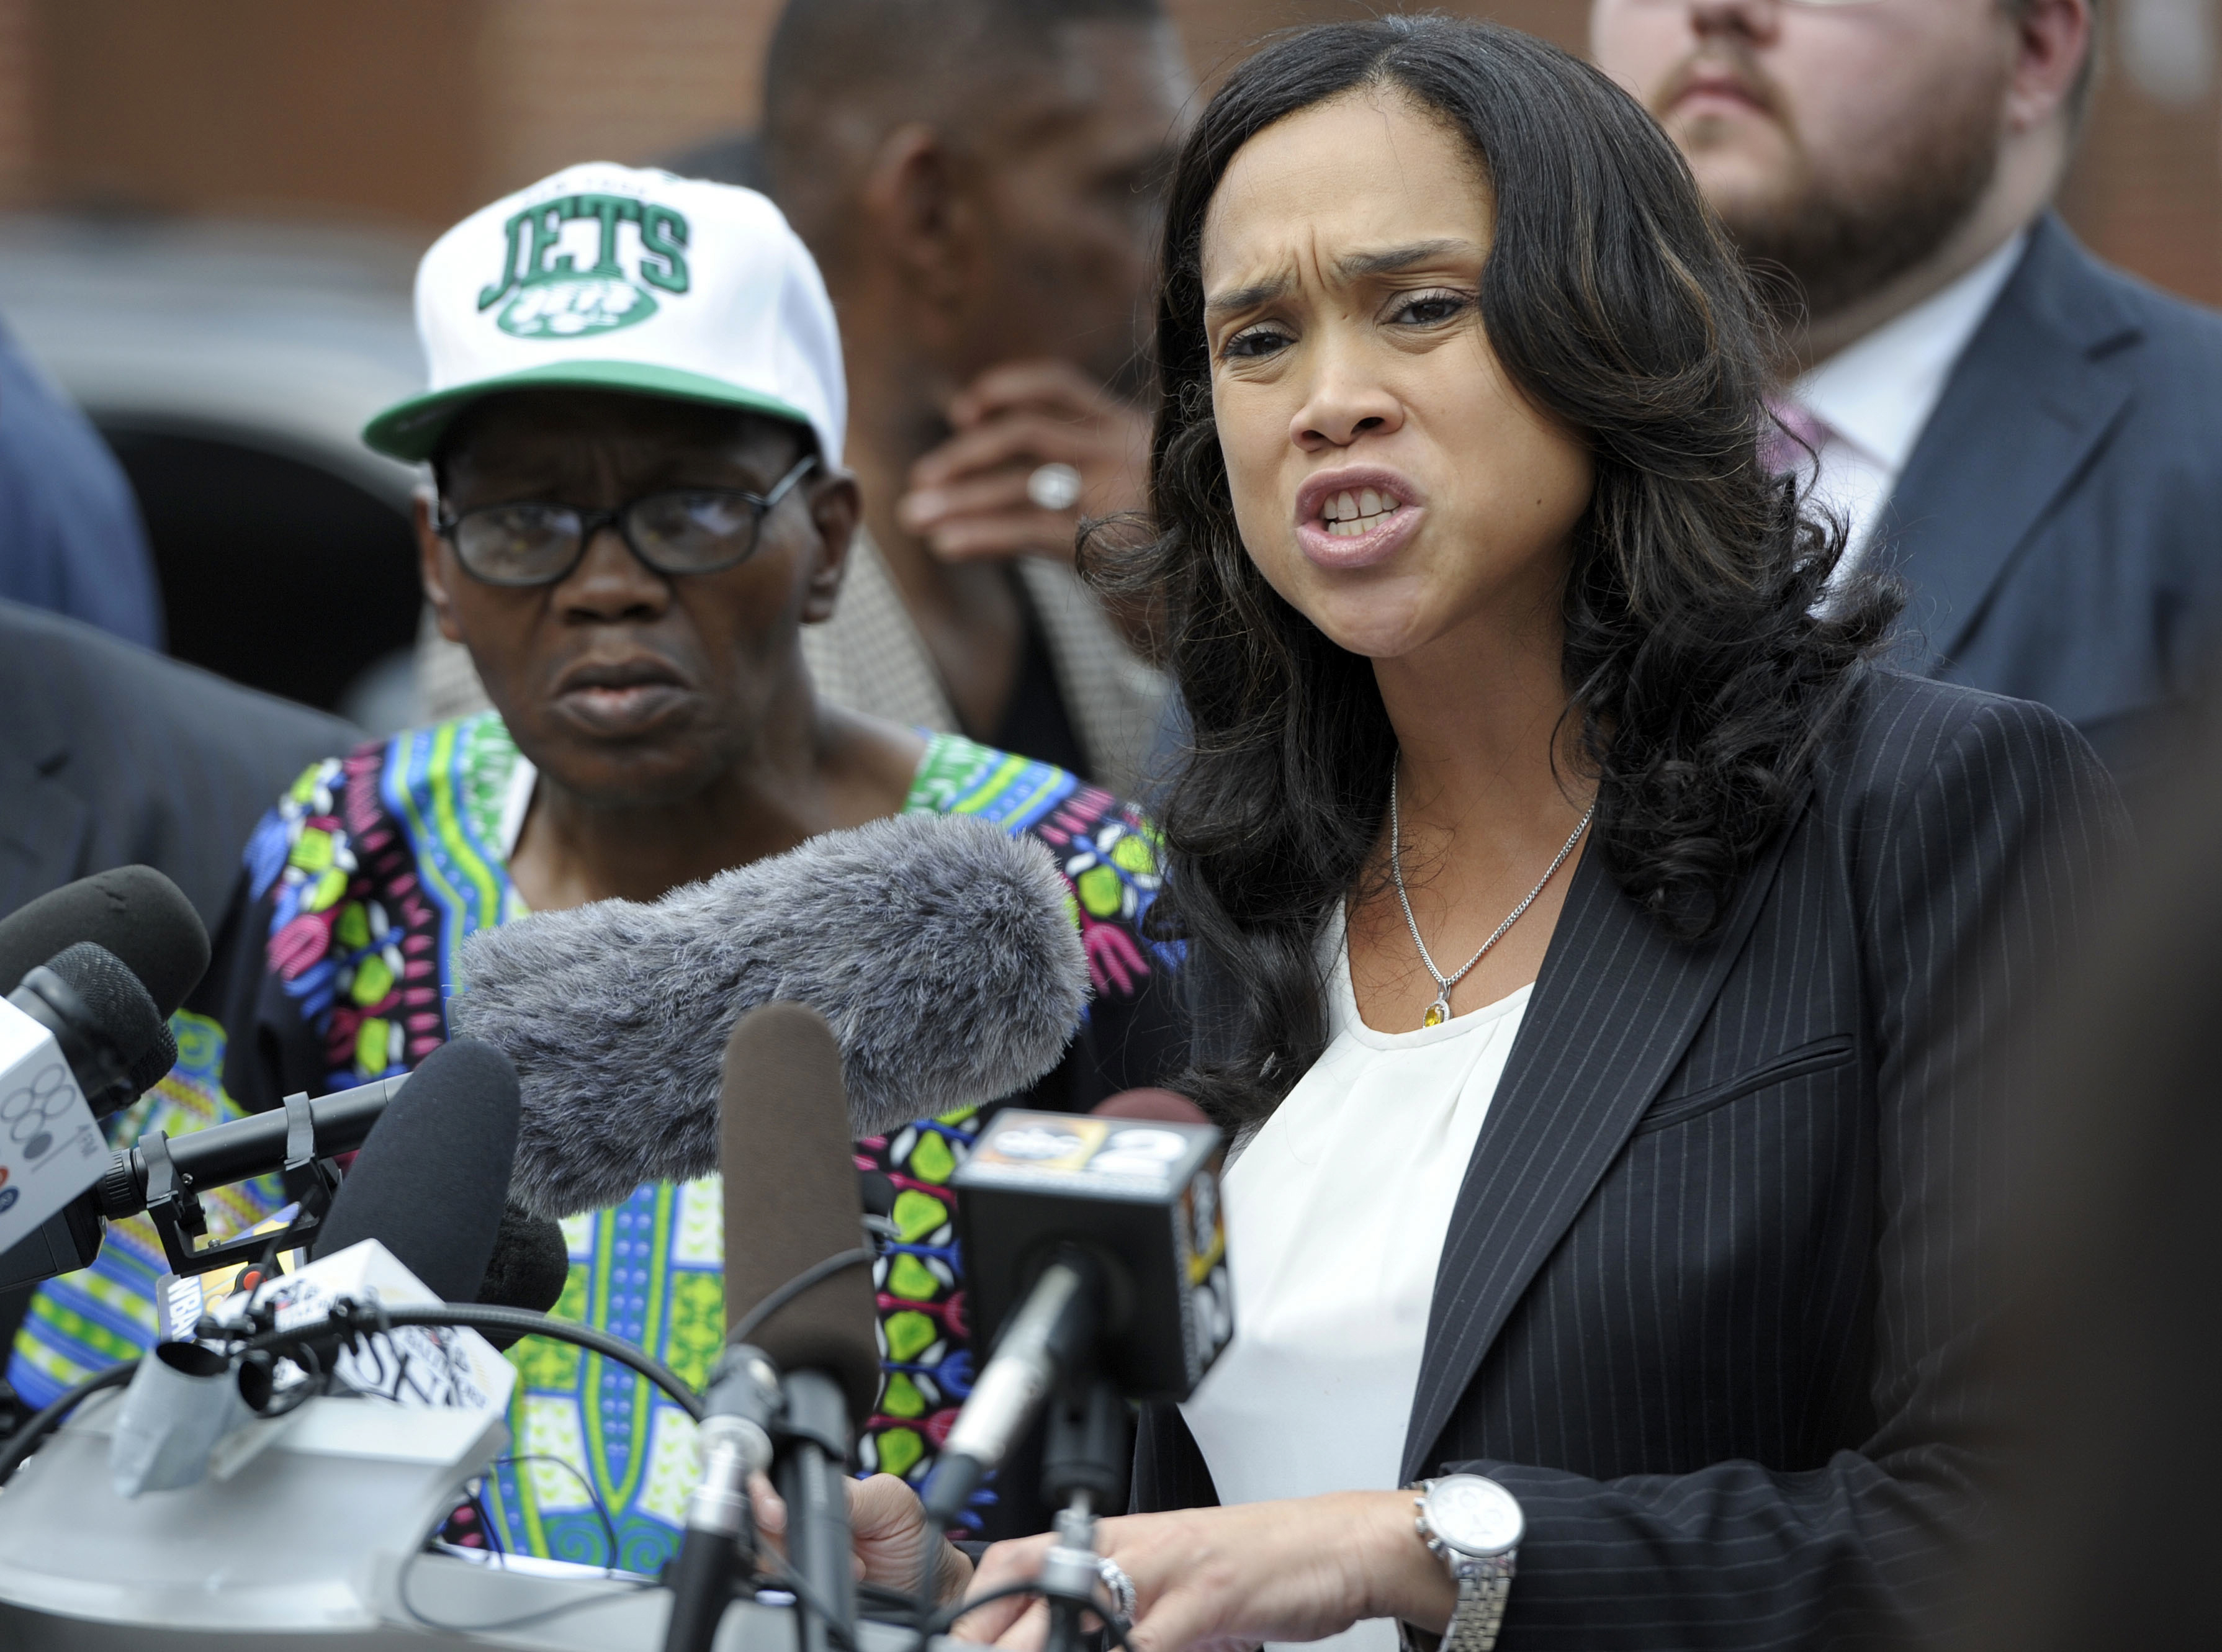 Baltimore State's Attorney Marilyn Mosby, right, holds a news conference near the site where Freddie Gray was arrested after her office dropped the remaining charges against three Baltimore police officers awaiting trial in Gray's death, in Baltimore, July 27, 2016. (Steve Ruark—AP)